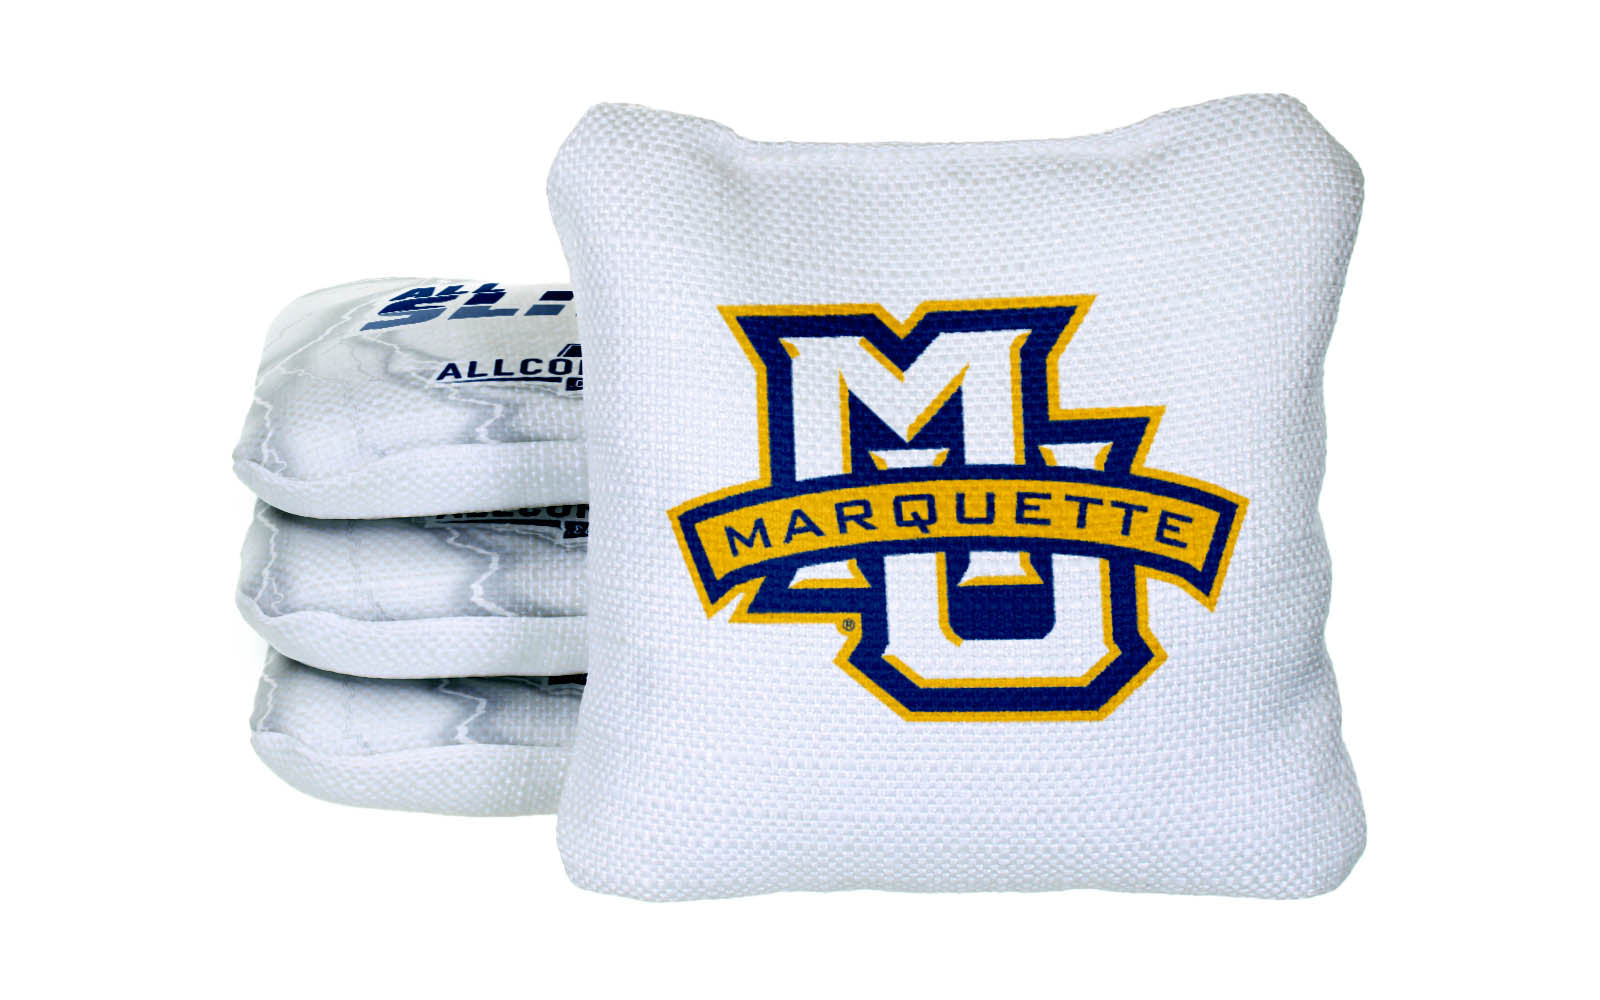 Officially Licensed Collegiate Cornhole Bags - All-Slide 2.0 - Set of 4 - Marquette University